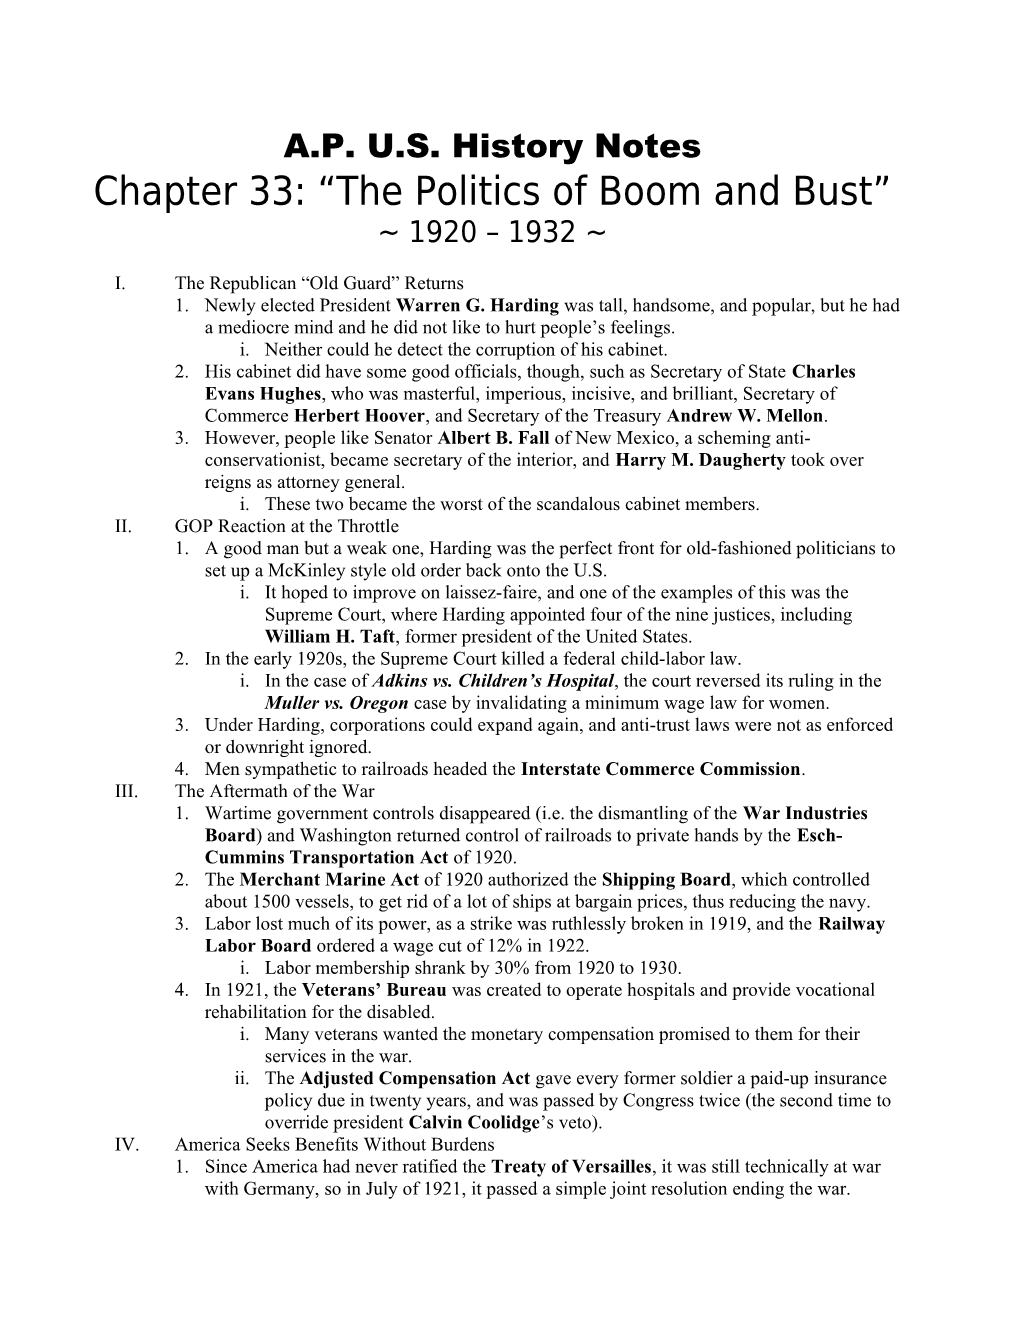 Chapter 33: the Politics of Boom and Bust